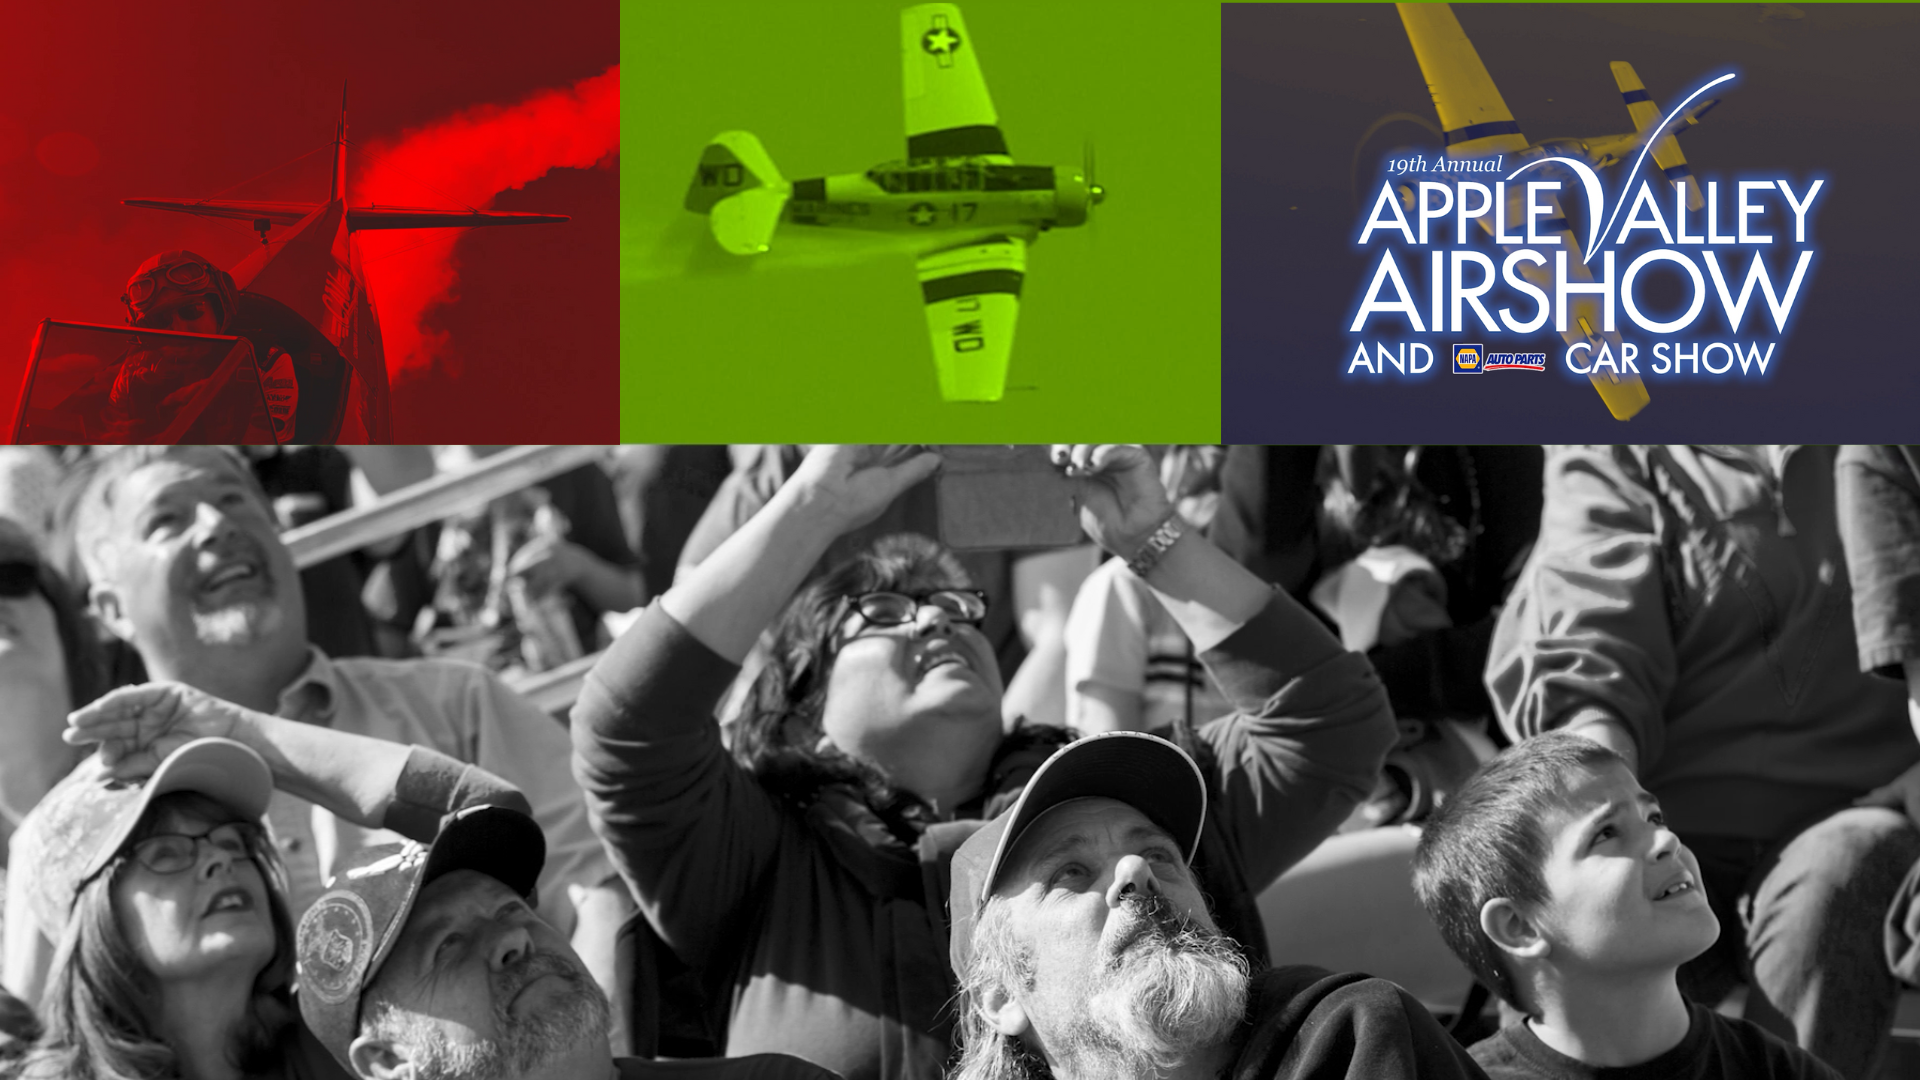 Photos of an airplane on the top left and middle with the Apple Valley Airshow logo on the top right. The bottom half is of a crowd of people looking up into the sky.